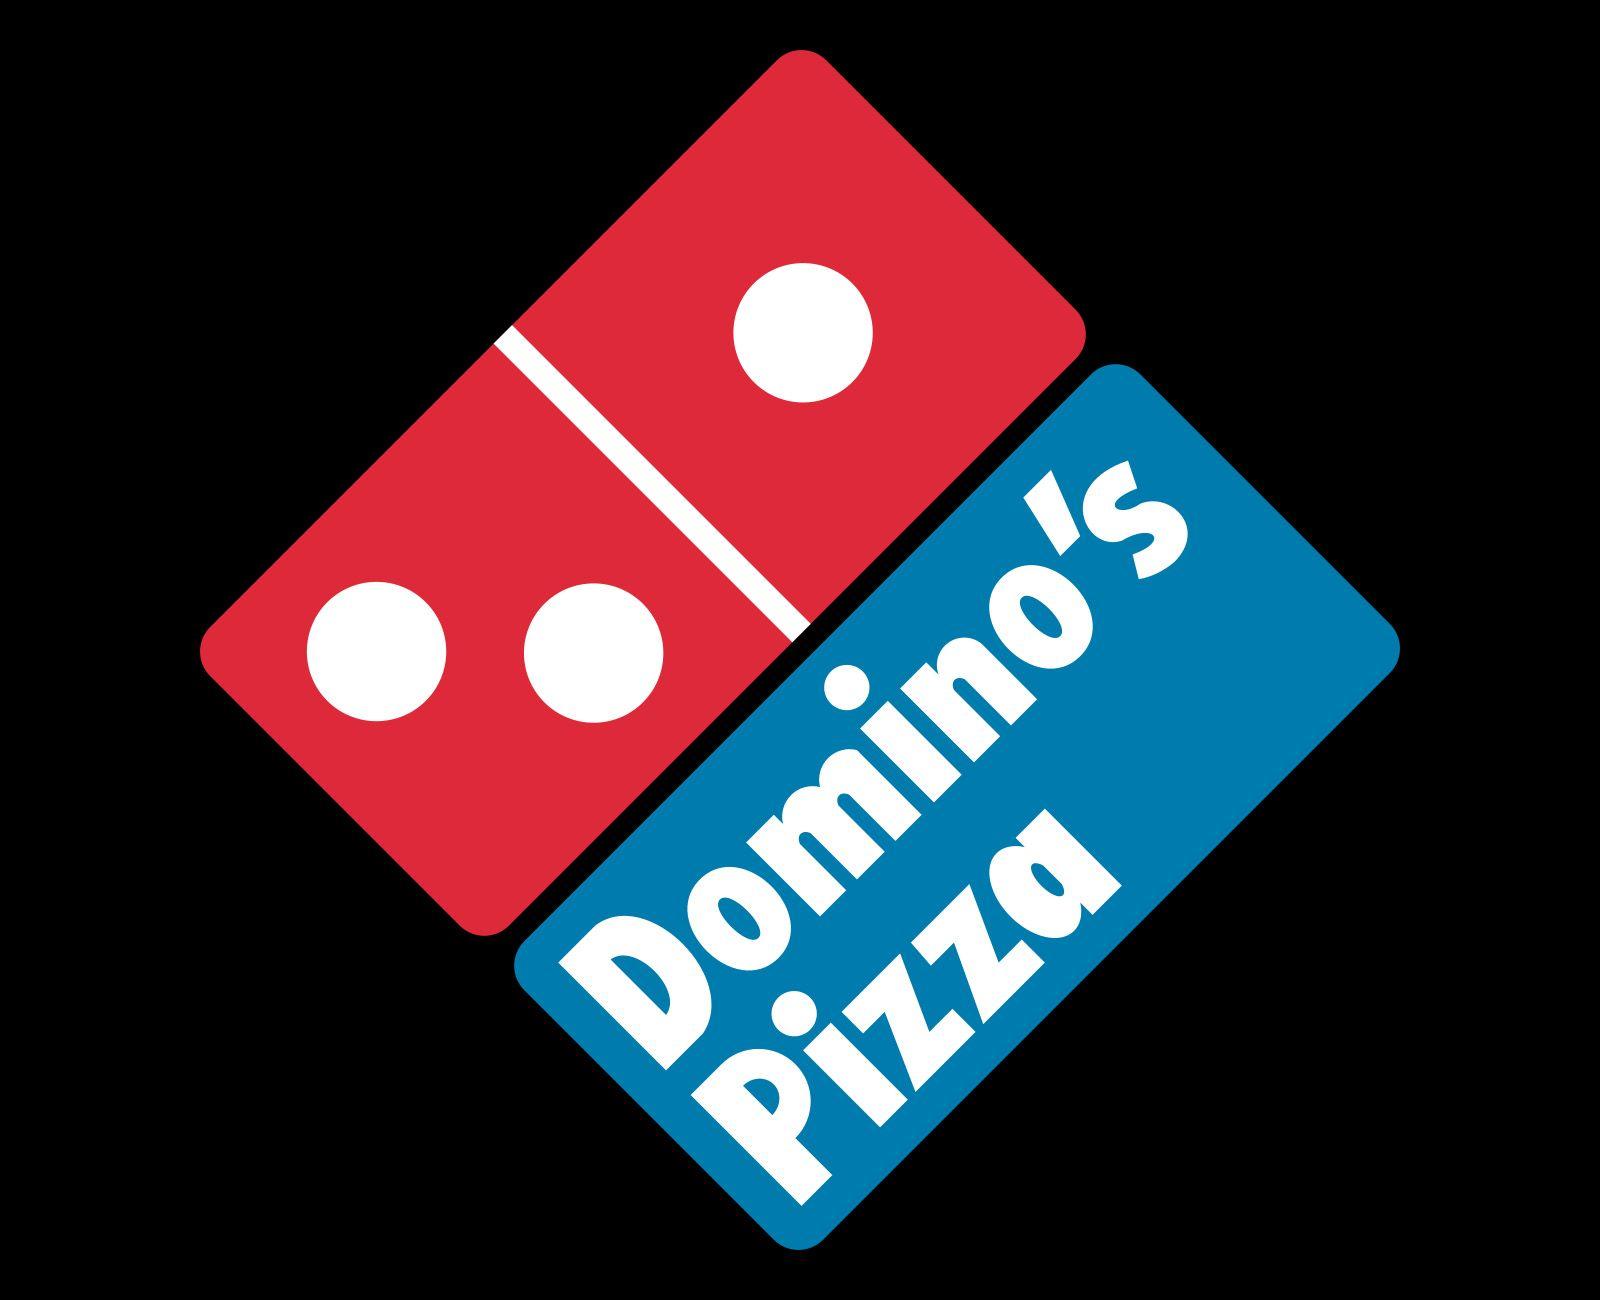 Domino's Logo - Domino's Logo, Domino's Symbol, Meaning, History and Evolution